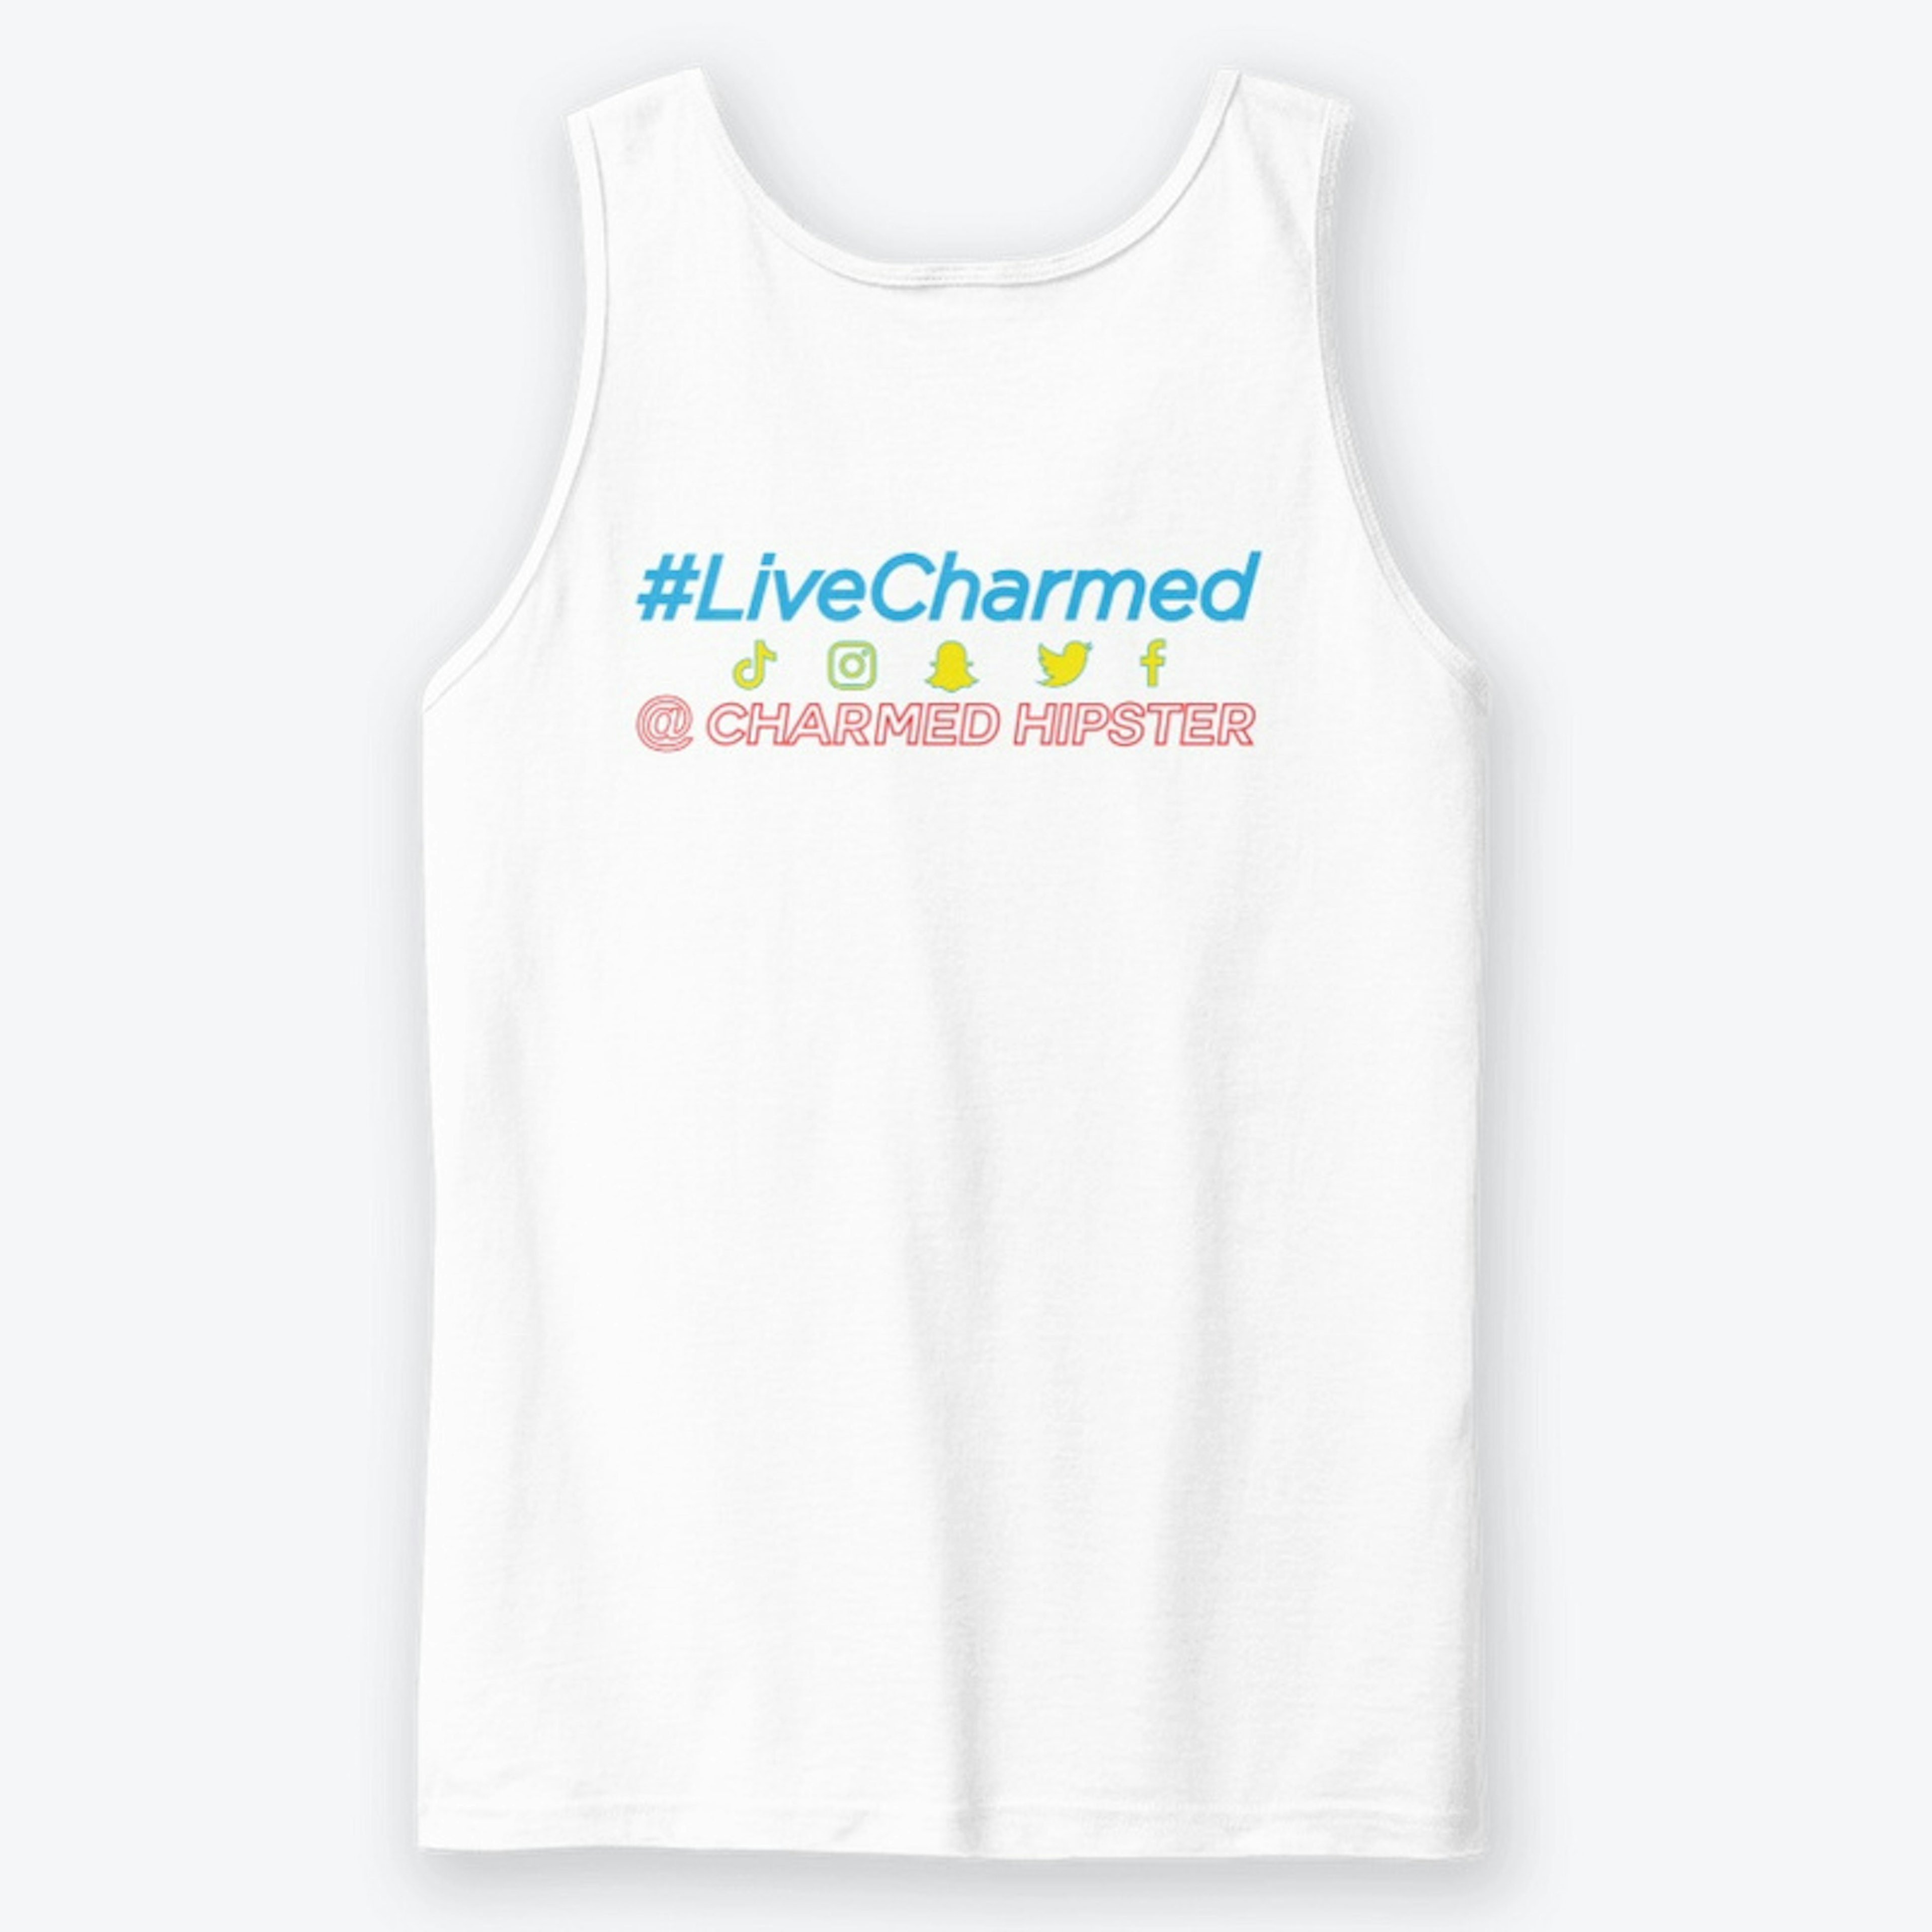 Charmed Hipster T-Shirt